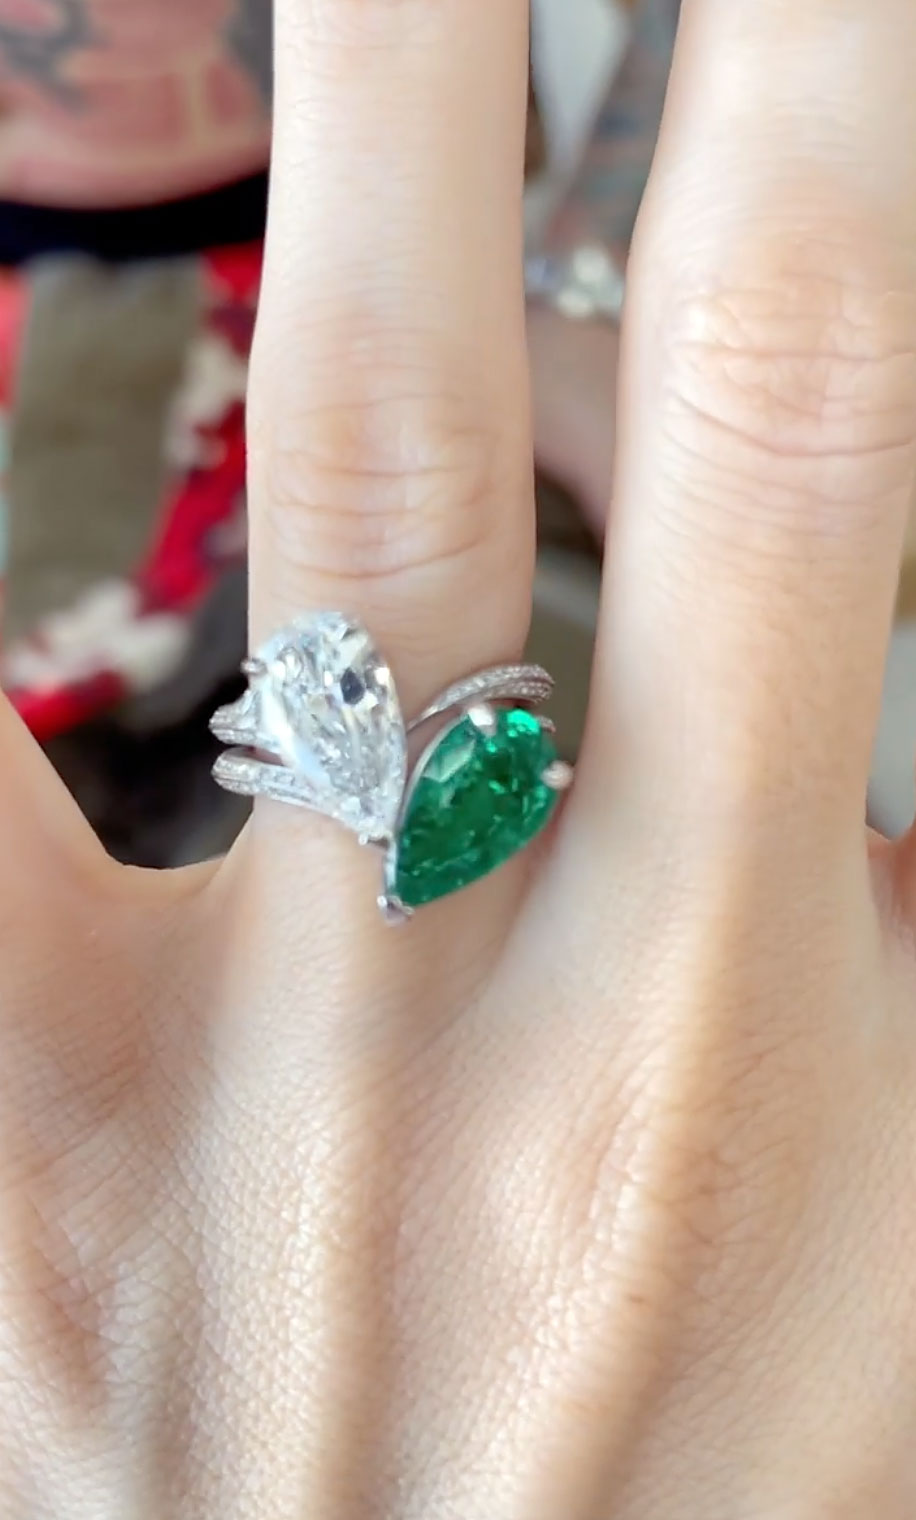 Two-stone celebrity engagement rings: Megan Fox to Jackie Kennedy